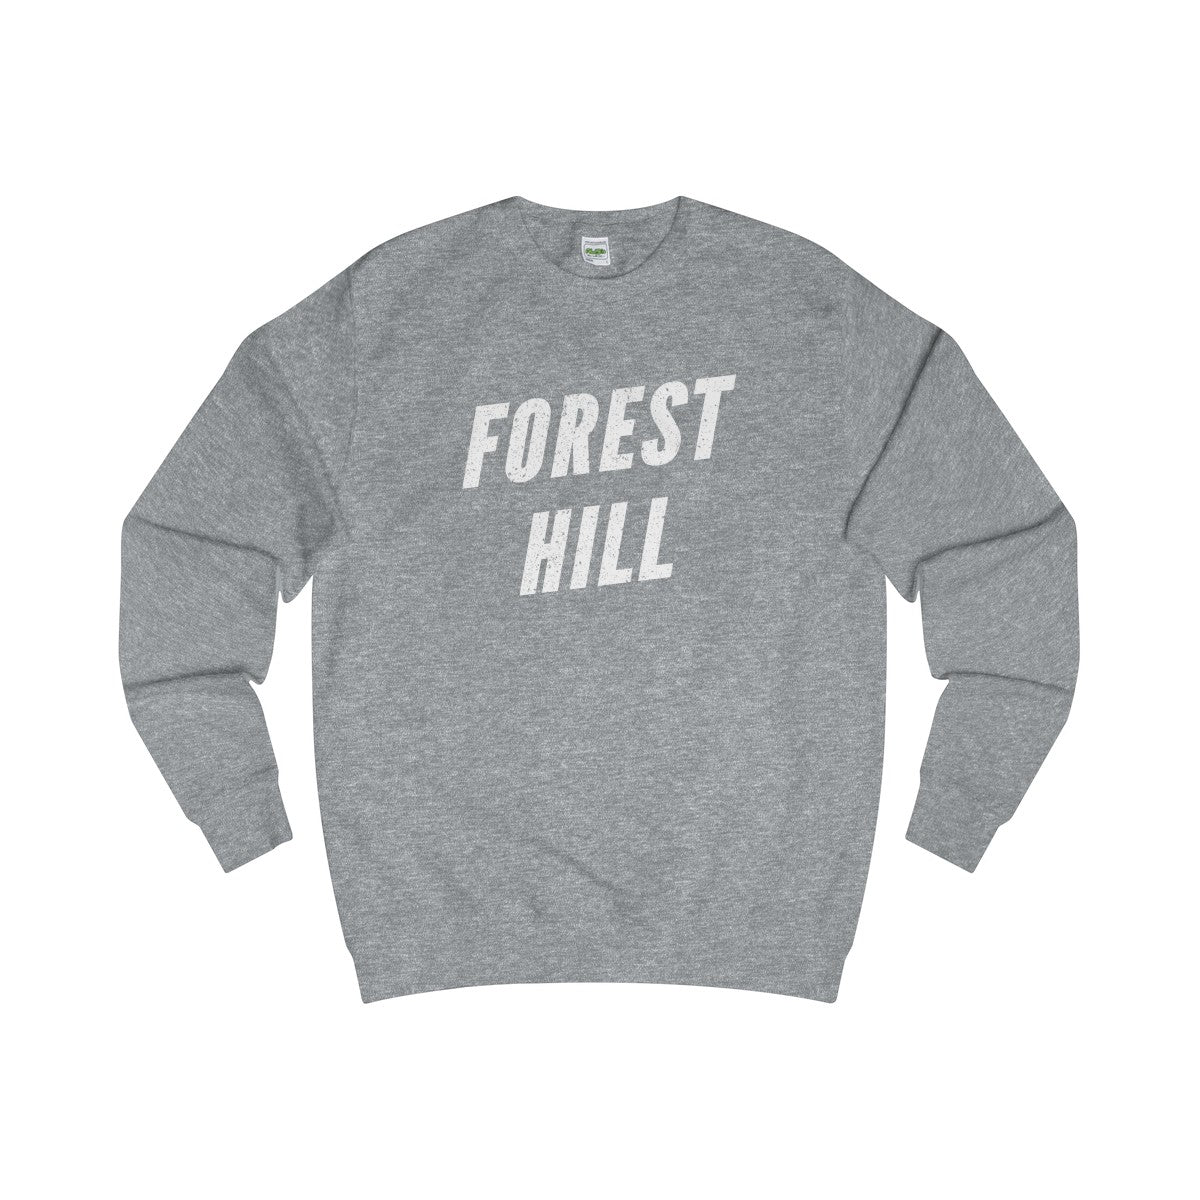 Forest Hill Sweater